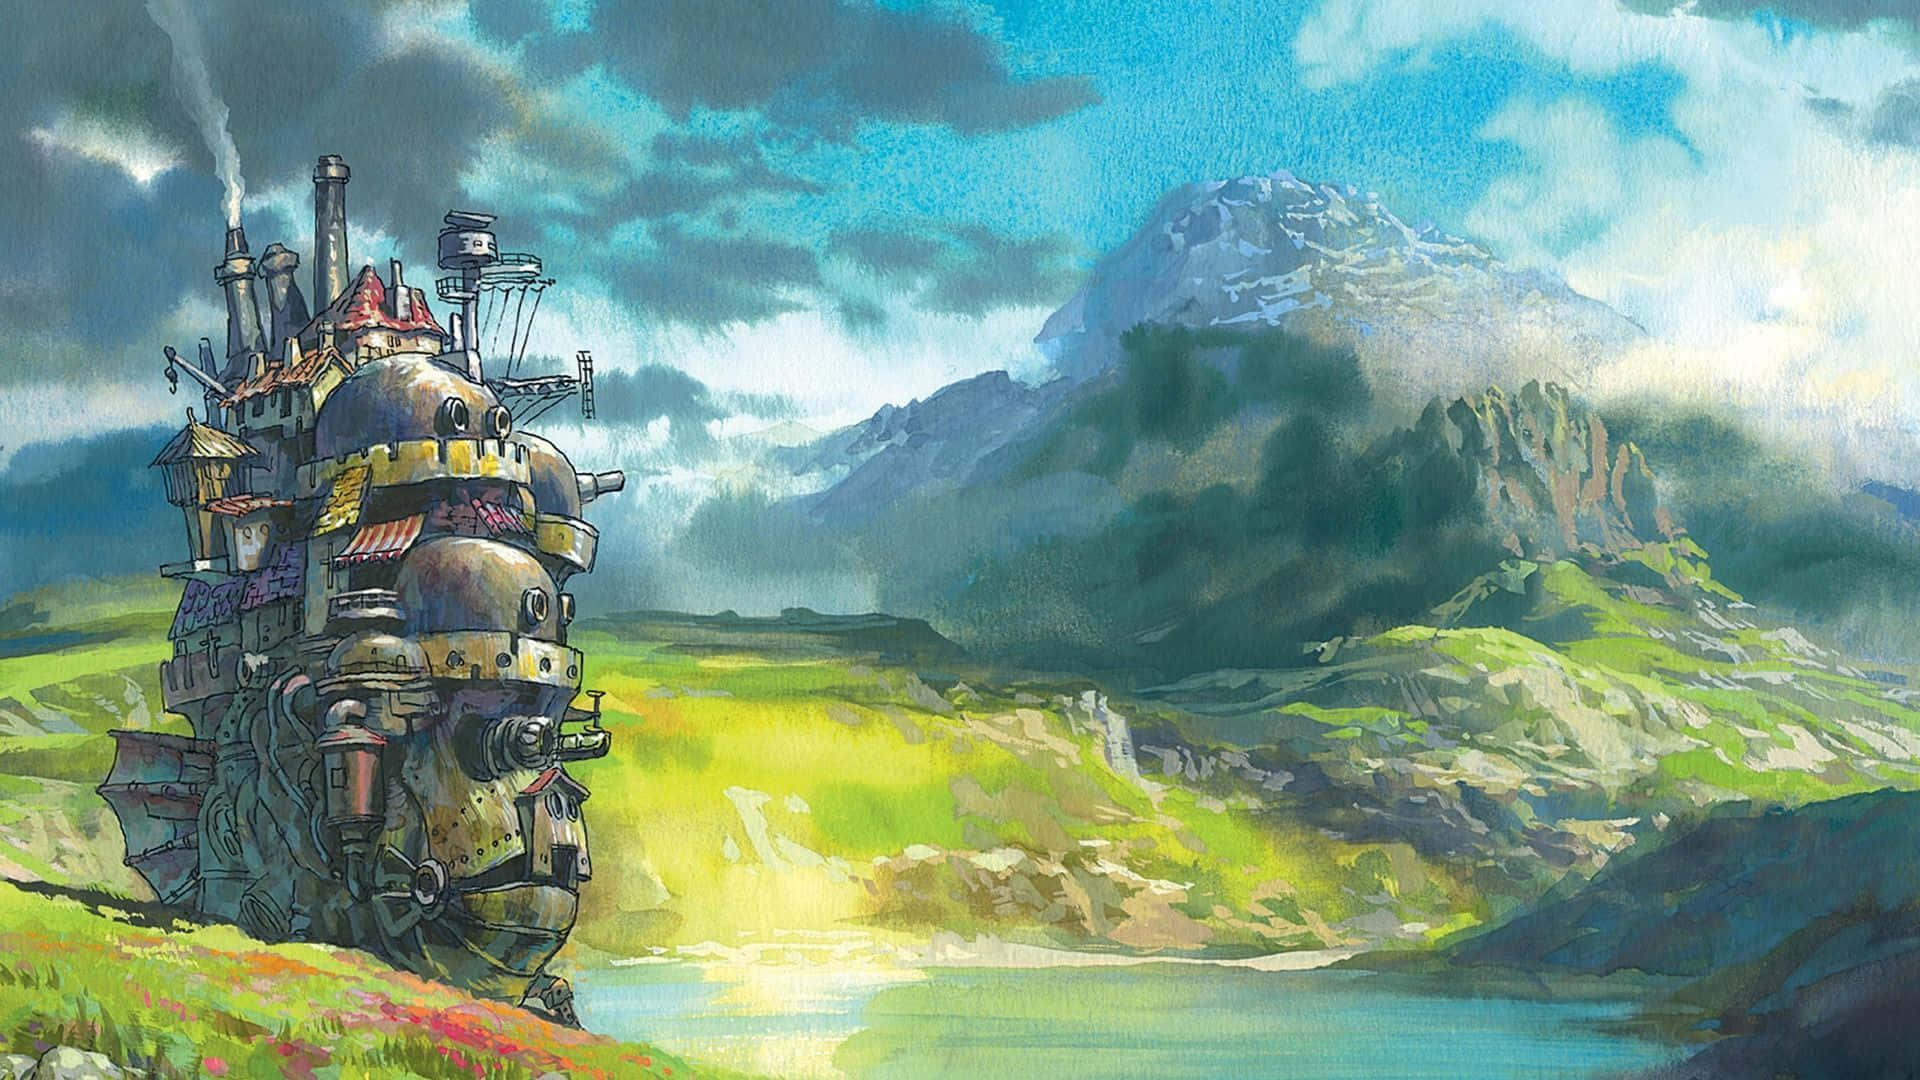 Get lost in the whimsical artwork of Studio Ghibli with this Aesthetic Desktop Wallpaper